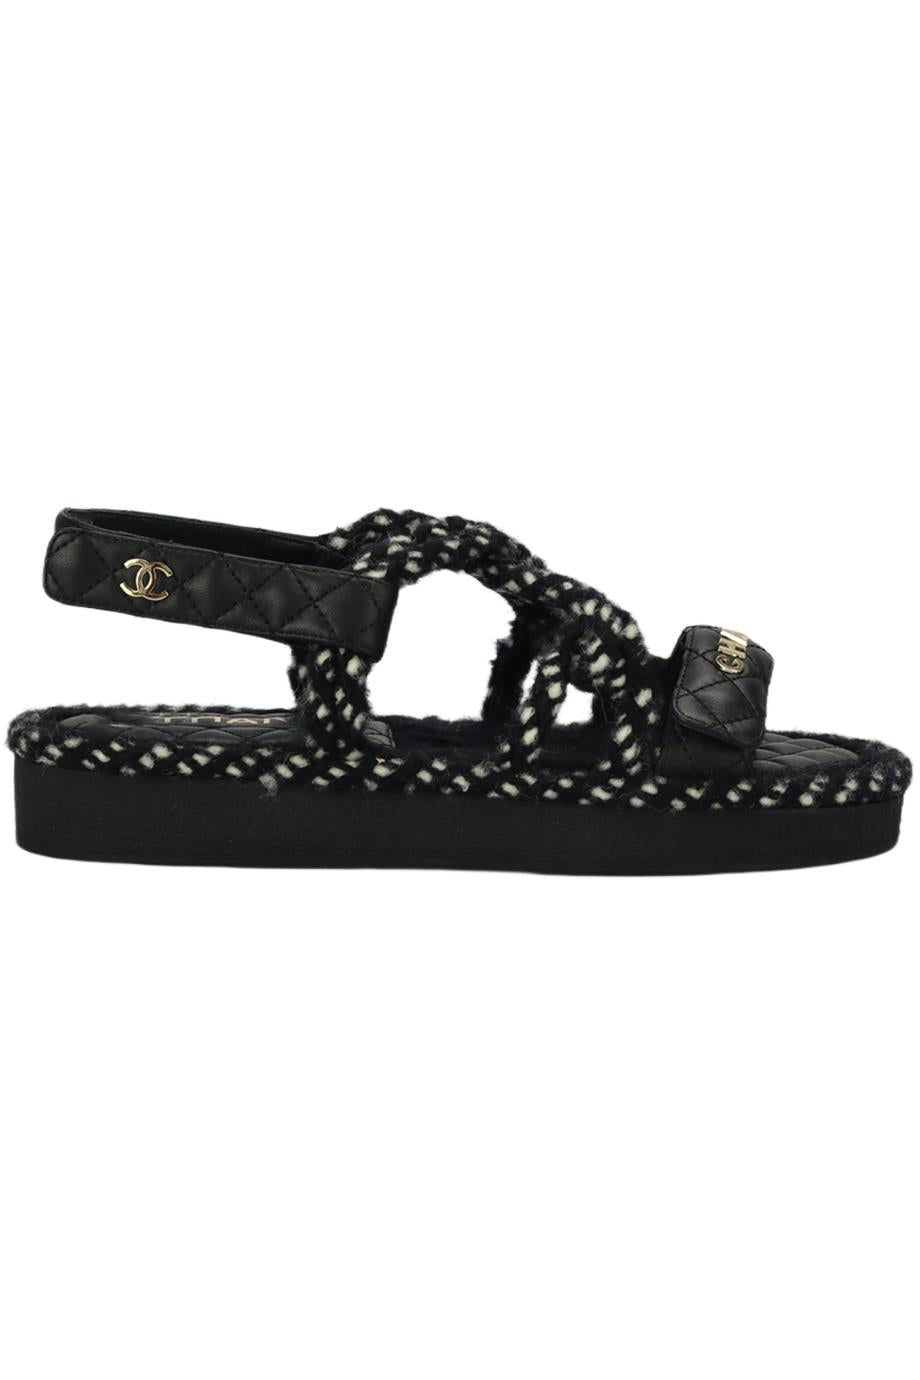 CHANEL 2021 CC DETAILED ROPE AND QUILTED LEATHER SANDALS EU 38 UK 5 US 8